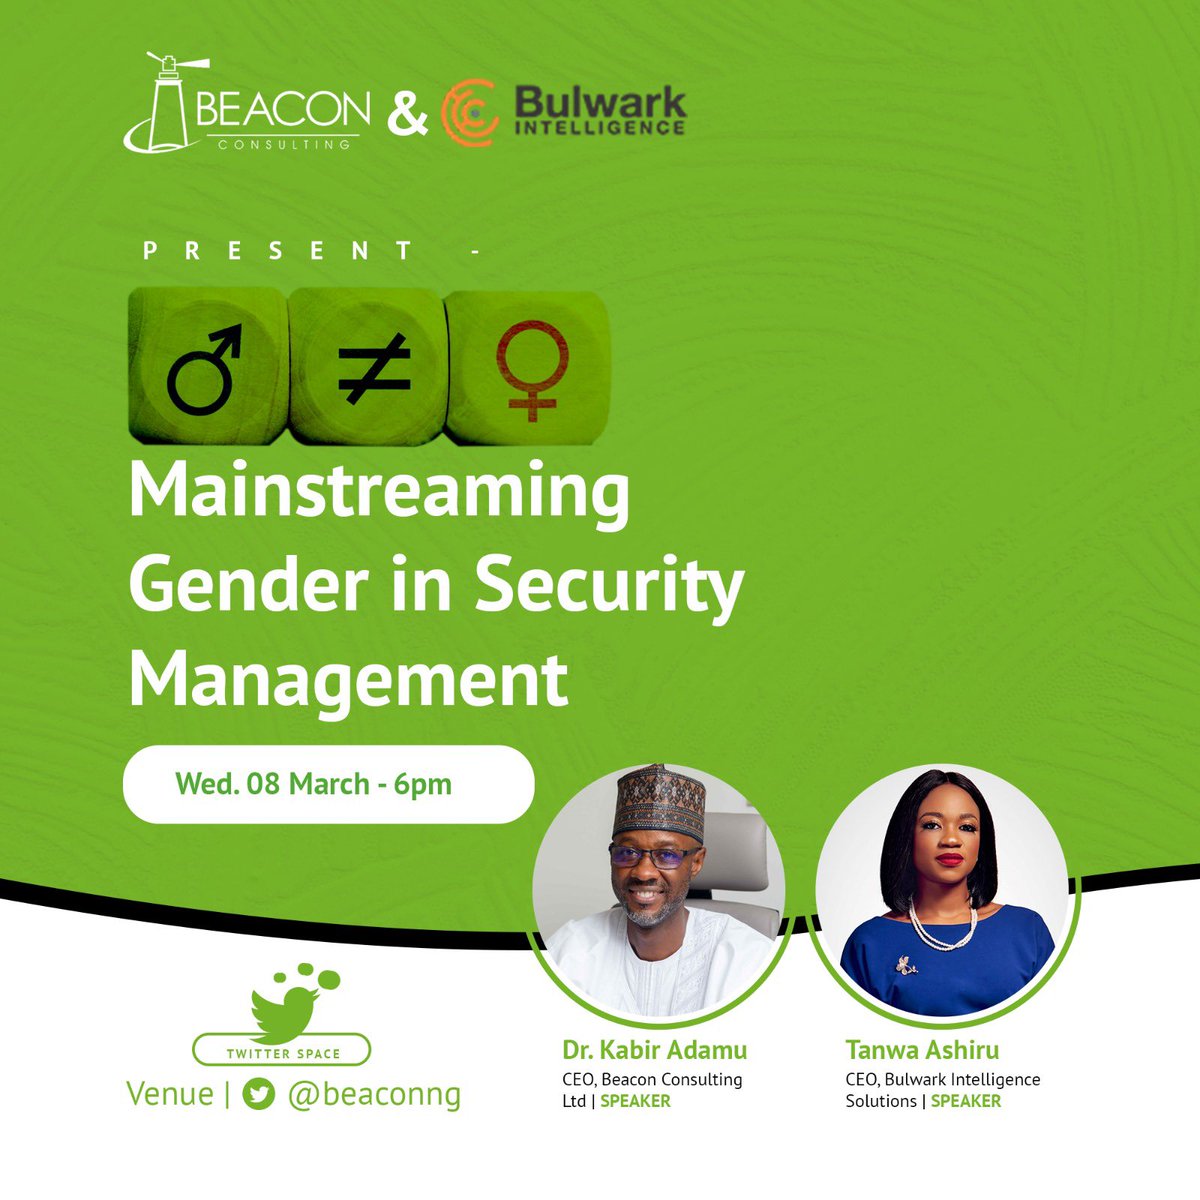 Join @kbadtweet  and @tanwaashiru on this interesting theme 'Mainstreaming Gender in Security Management'
Date: Wednesday 8th March, 2023
Time: 6pm
Venue: Twitter @beaconng 

Don't miss out on this empowering conversation!

#BeaconNG #GenderInSecurity #WomenInSecurity #IWD2023